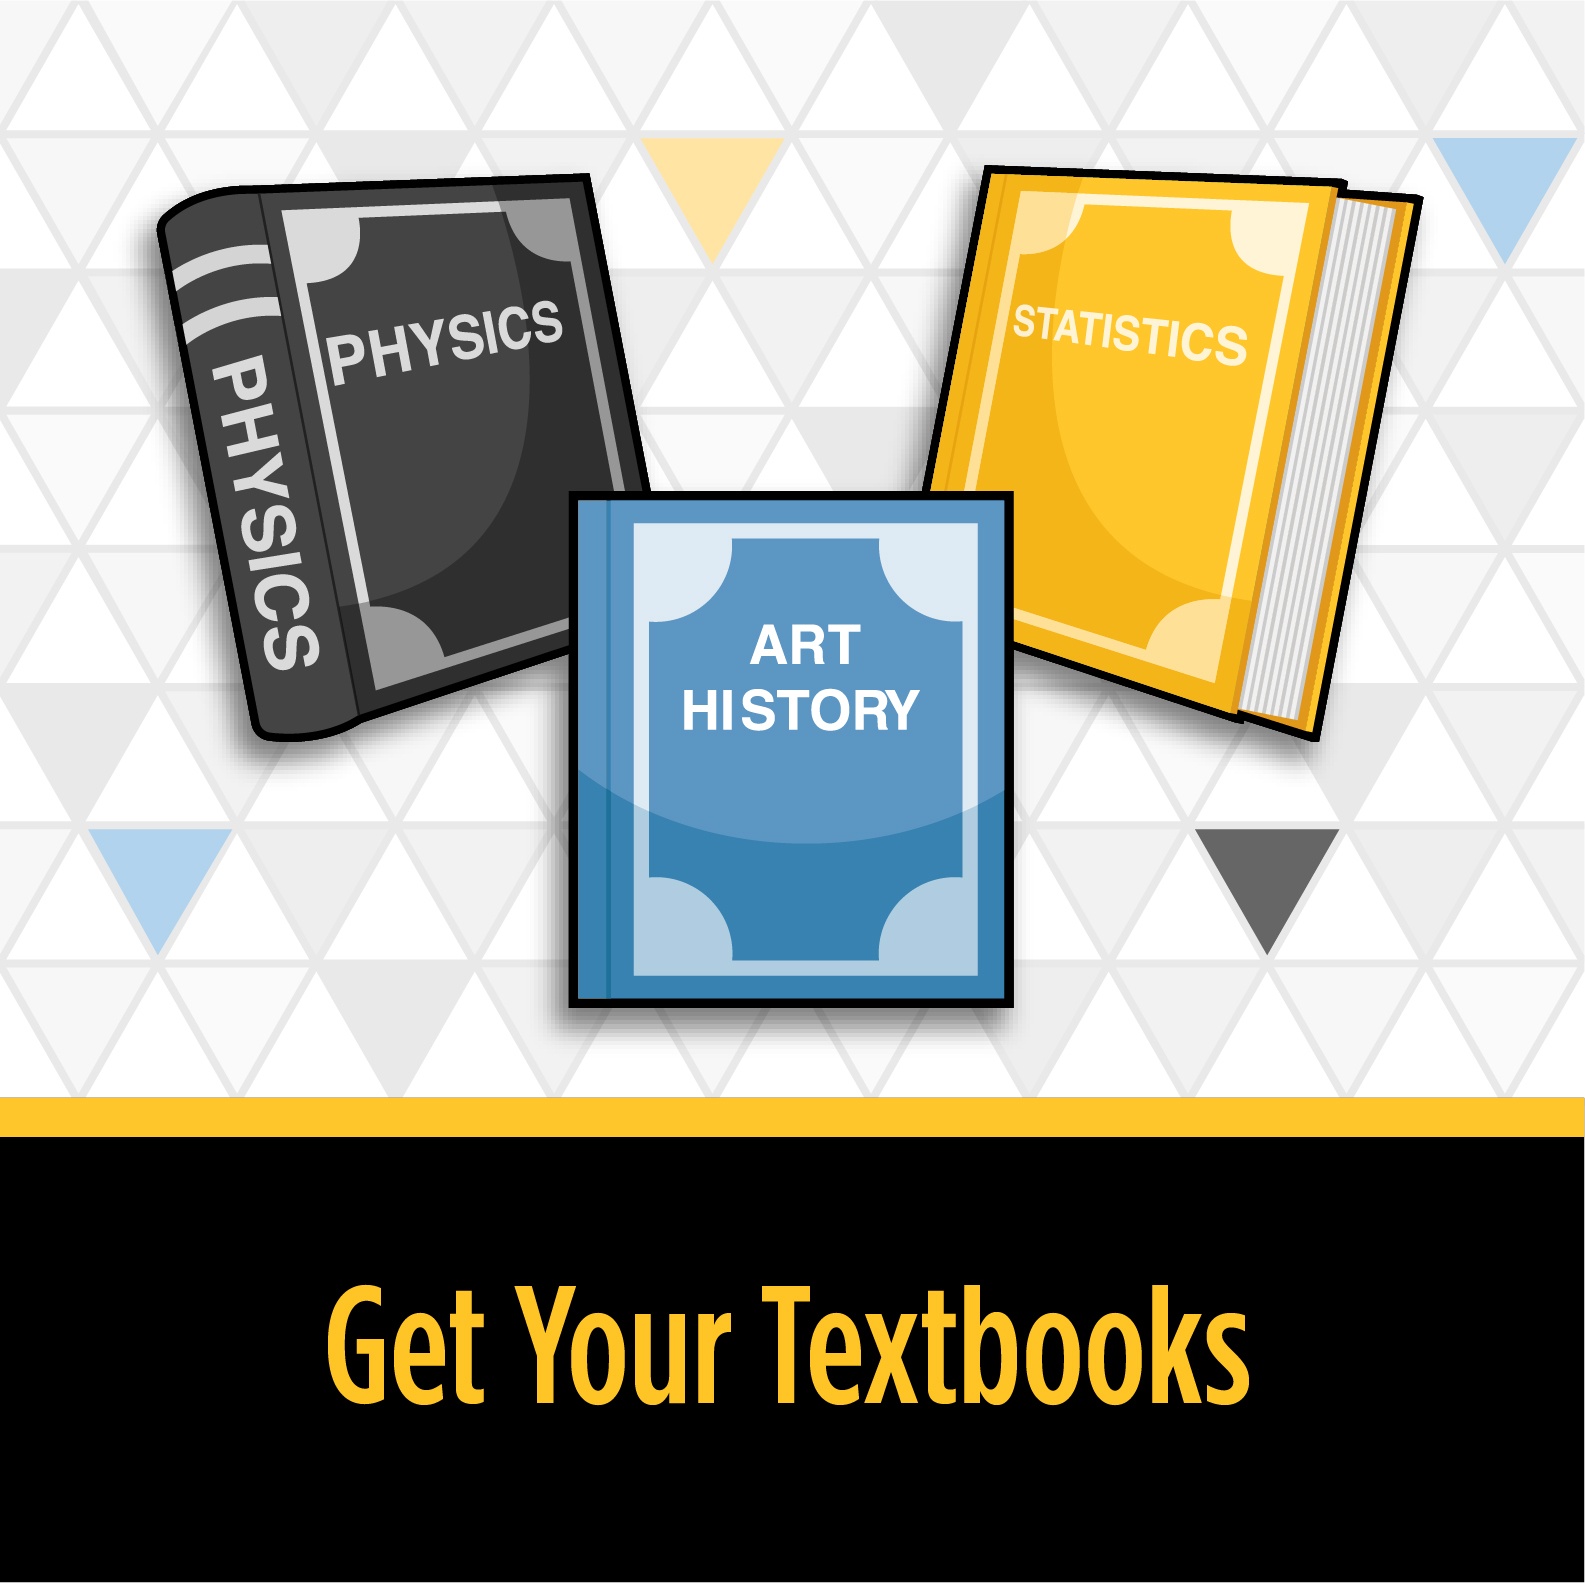 Get your textbooks